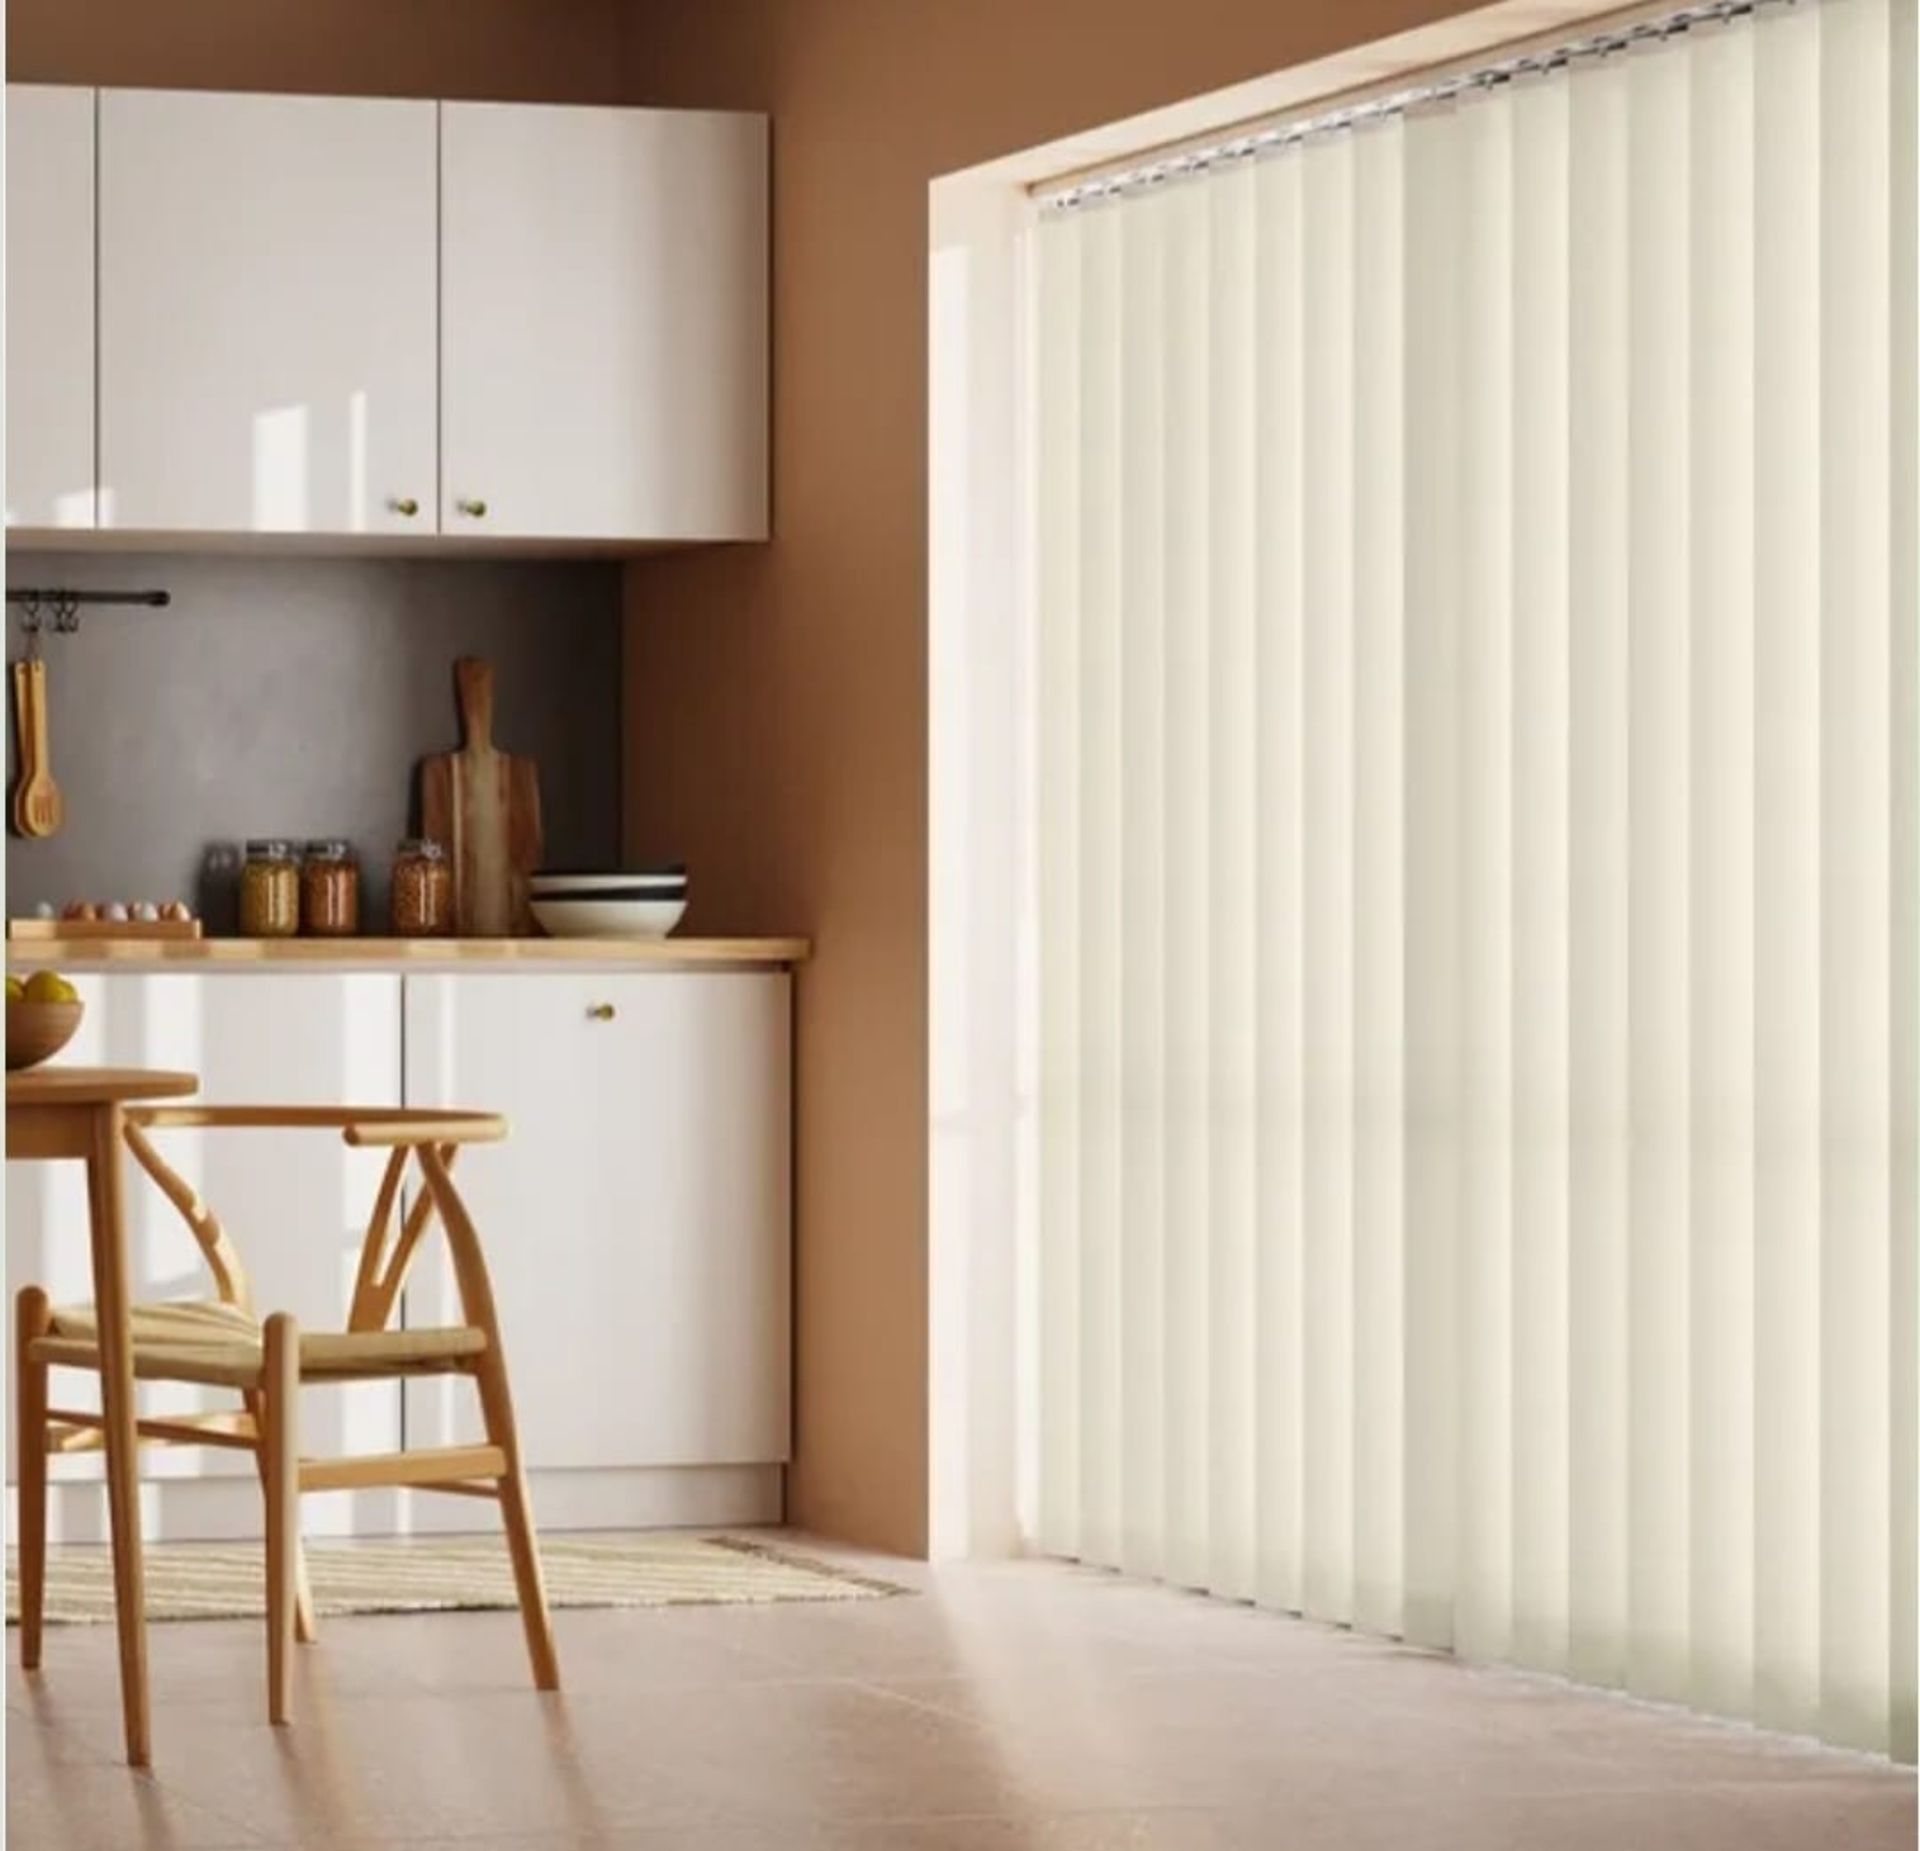 RRP £165 - CREAM VERTICAL BLIND -COMPLETE WITH POLE & FITTINGS SIZES: 300 X 260 - IMAGES ARE FOR